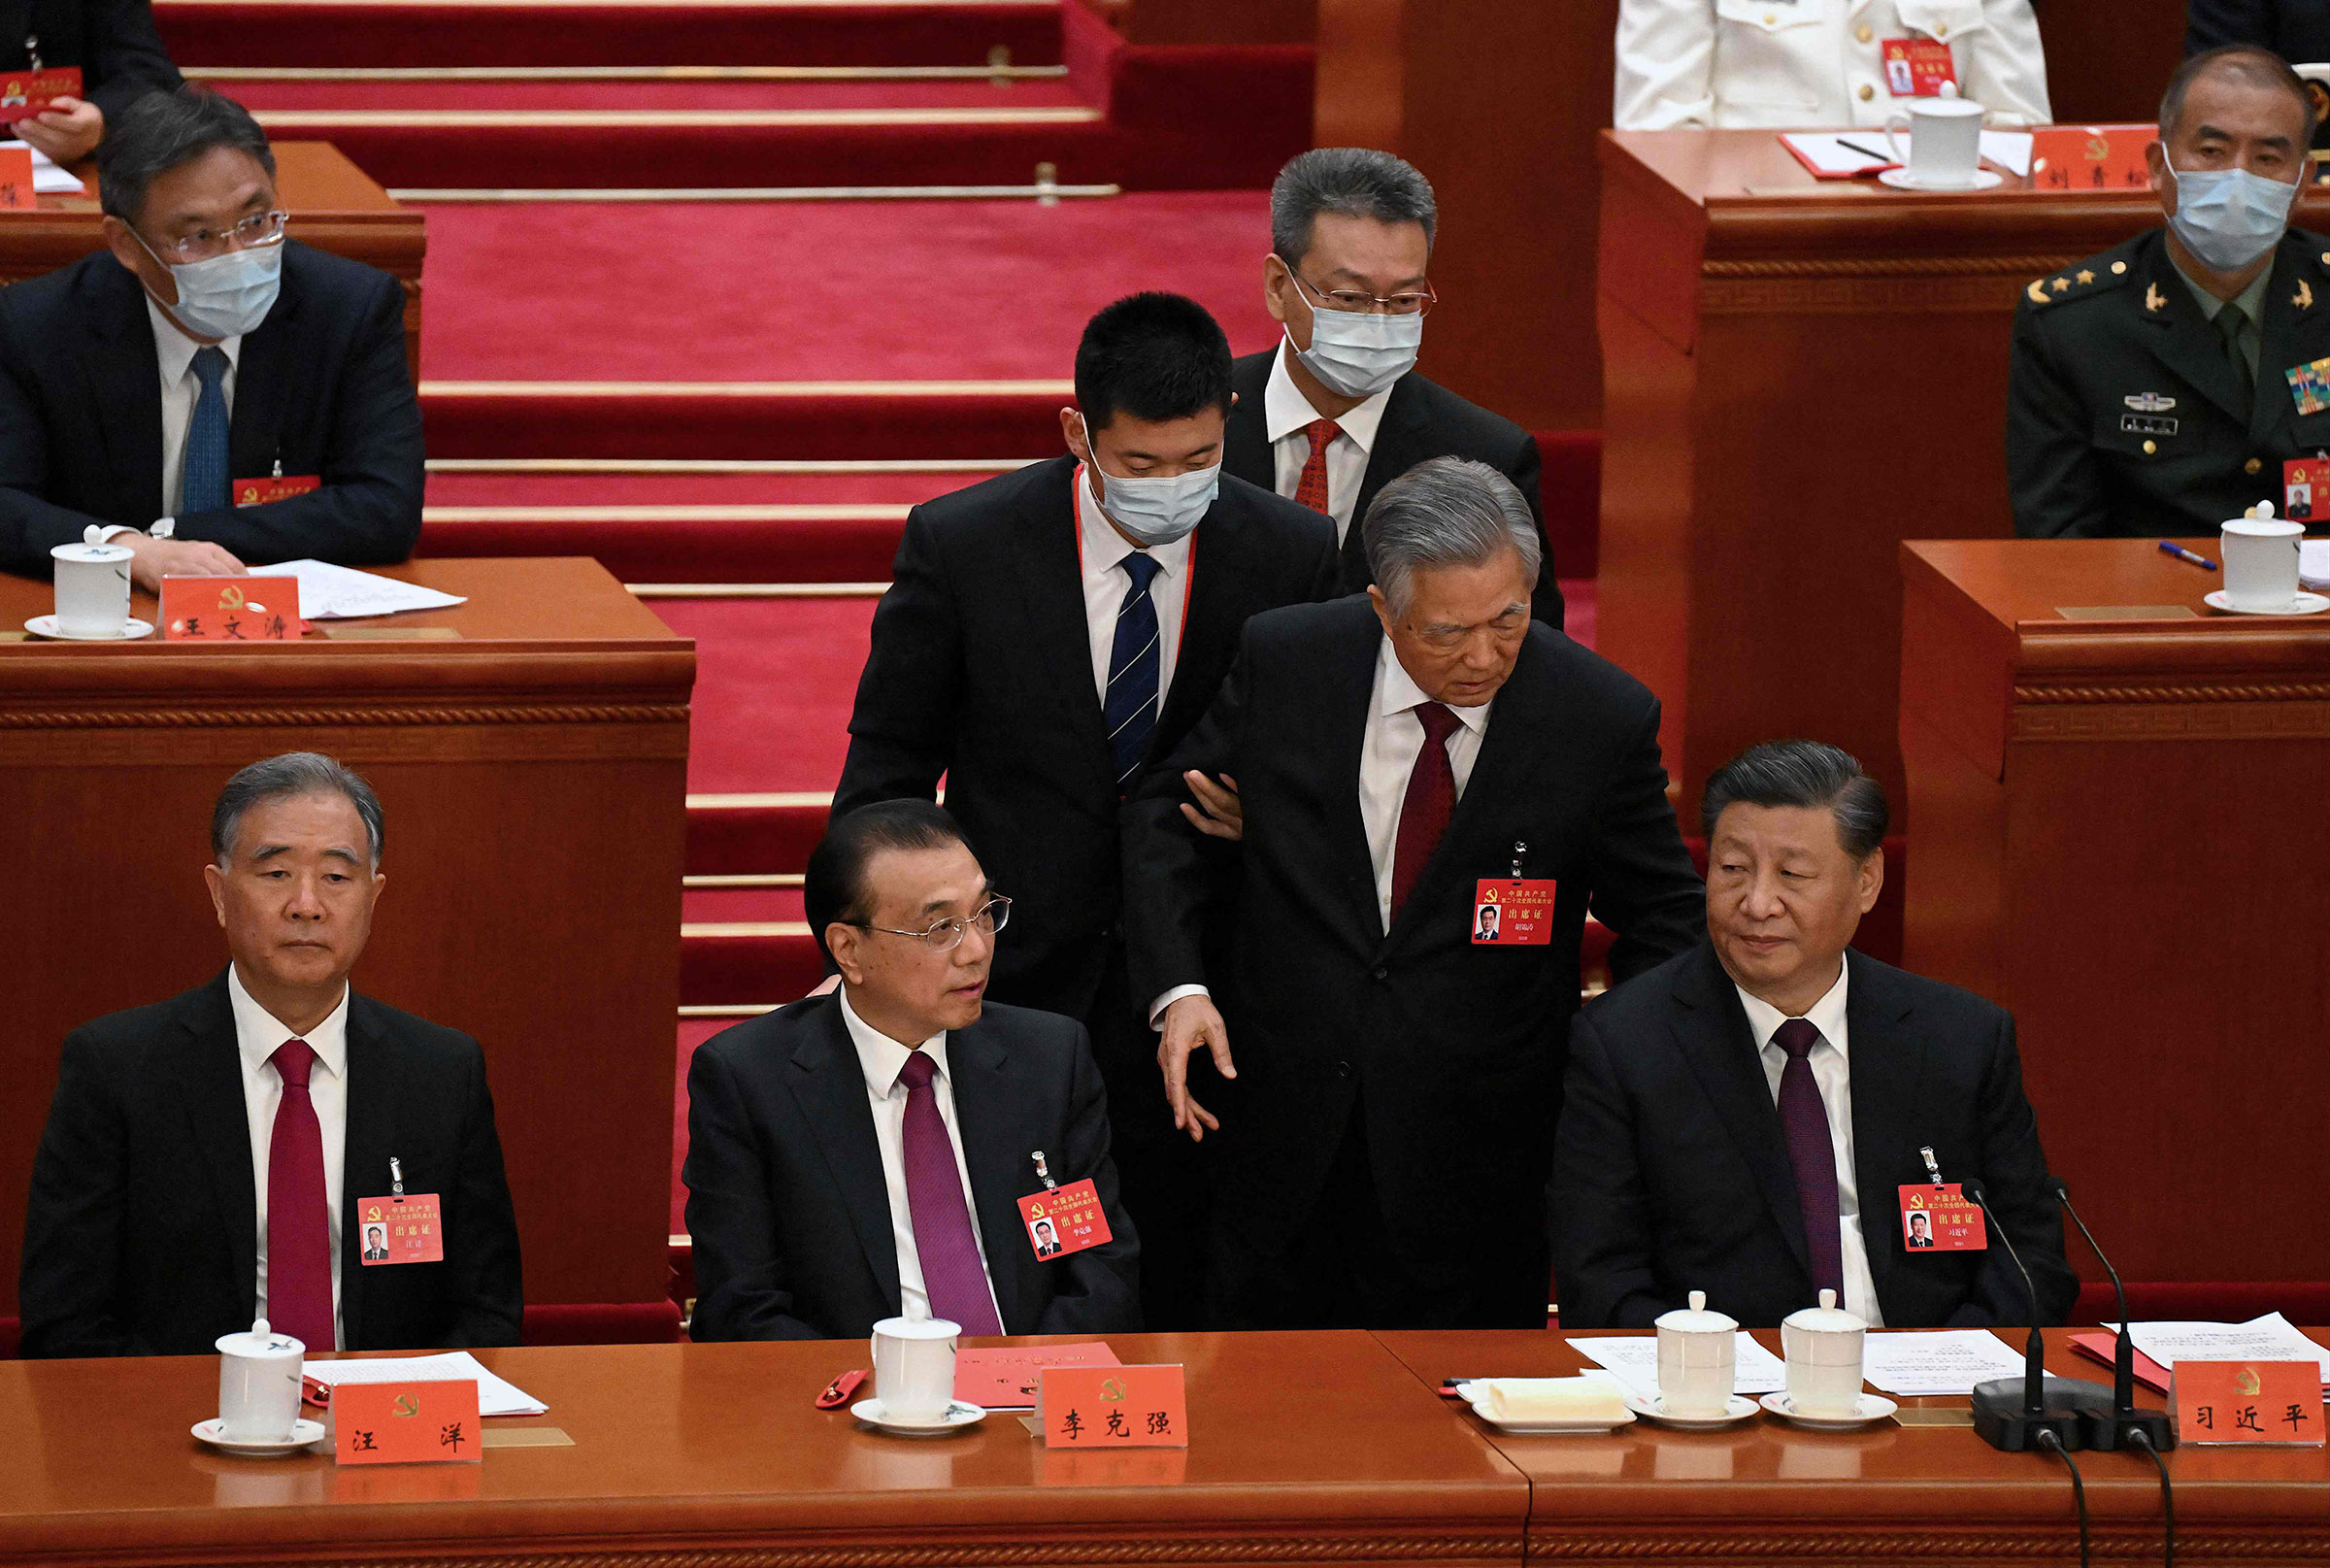 China's President Xi Jinping sits besides Premier Li Keqiang as former president Hu Jintao is assisted to leave from the closing ceremony of the 20th China's Communist Party's Congress at the Great Hall of the People in Beijing on Oct. 22. (Noel Celis—AFP/Getty Images)